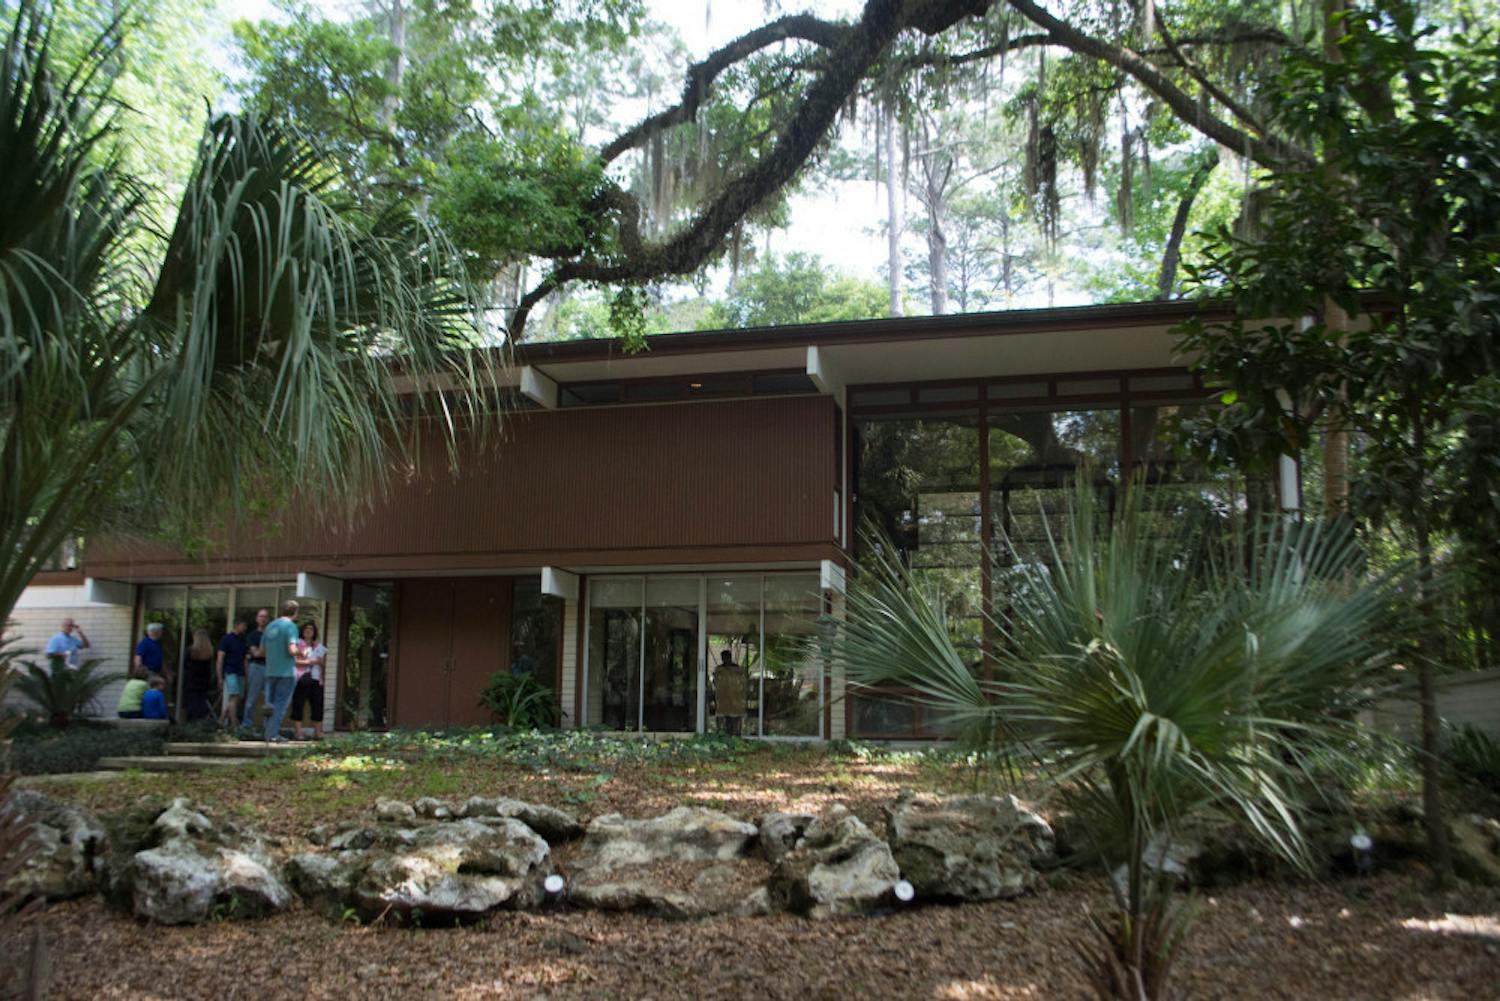 The 3105 SW 5th Court house was one of the six mid-century modern homes featured on the Gainesville Modern Weekend tour on Saturday. Each house had contractors and/or the homeowners on-site to answer questions. 